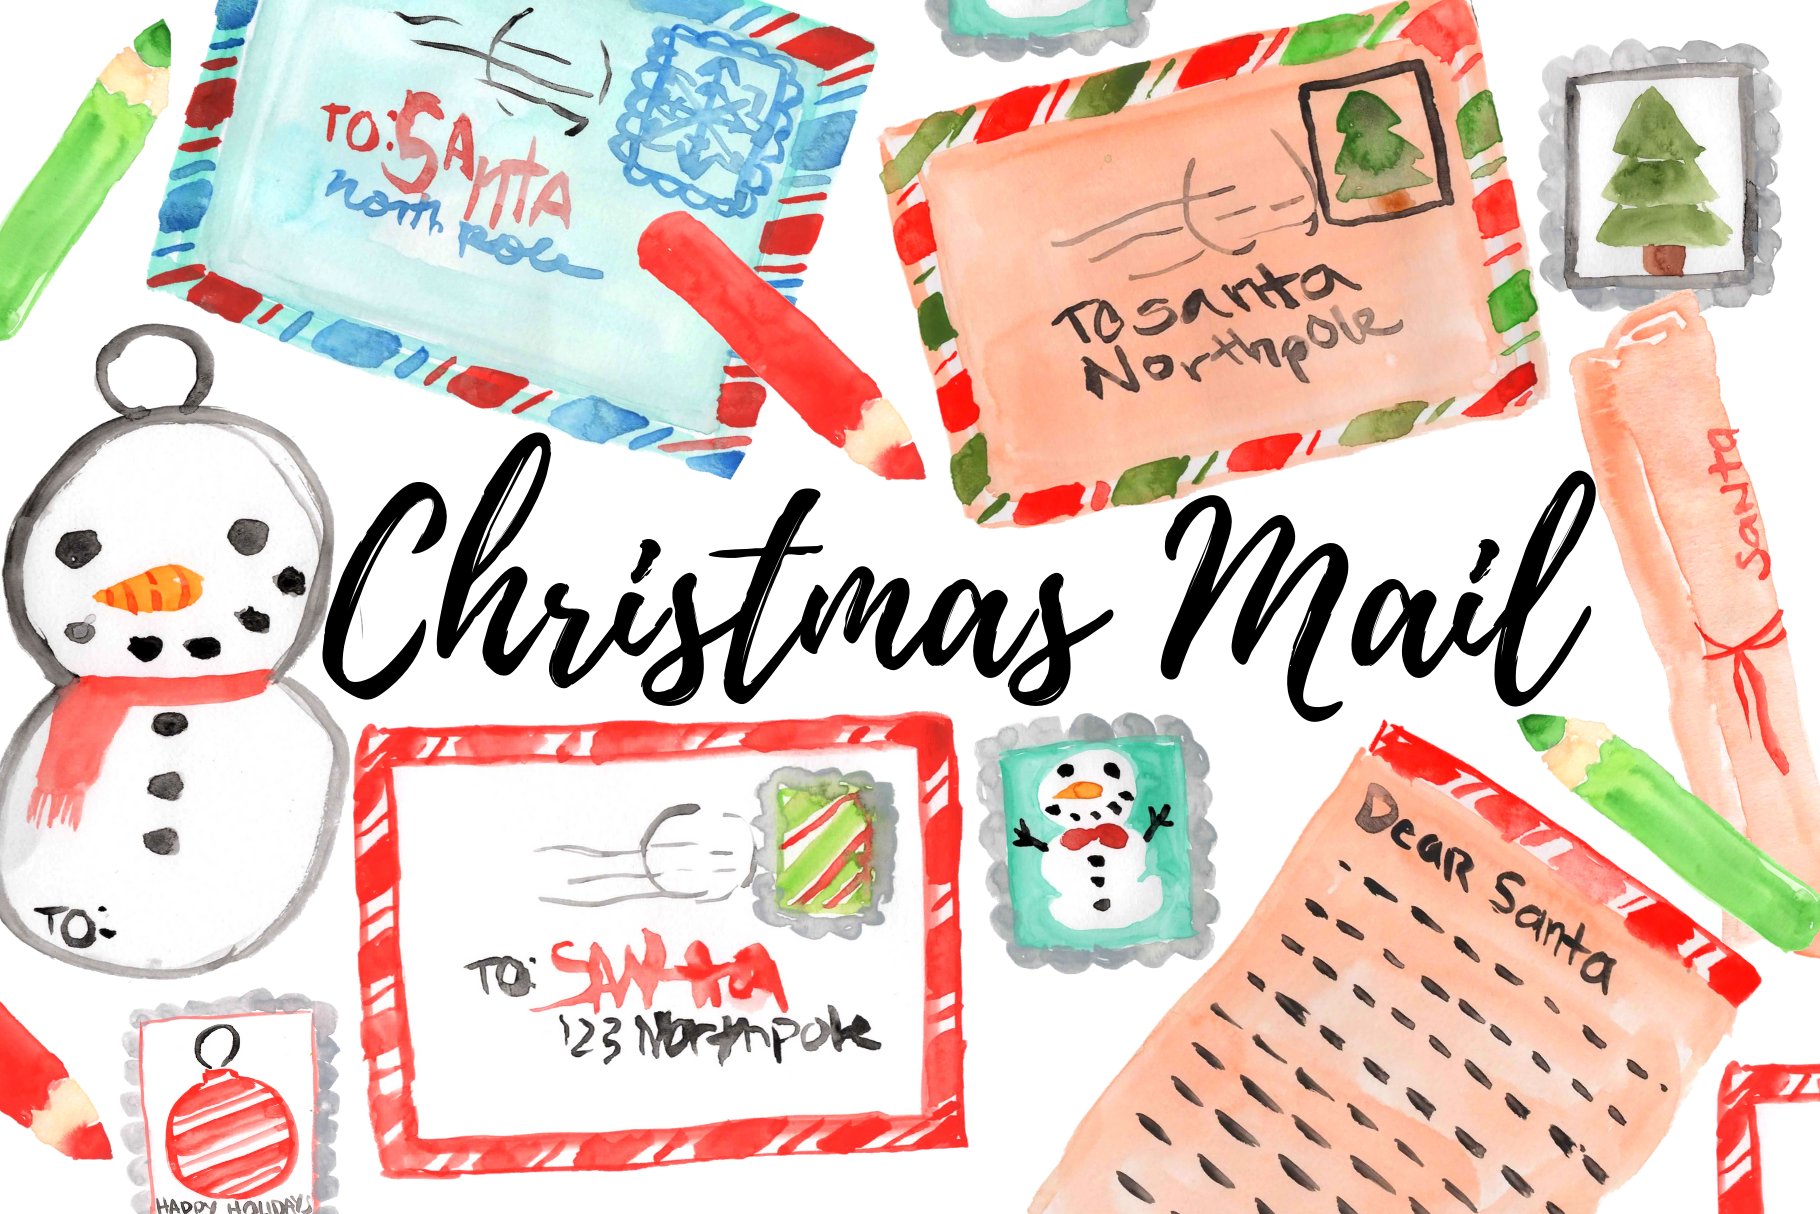 Watercolor Christmas Mail Clipart cover image.